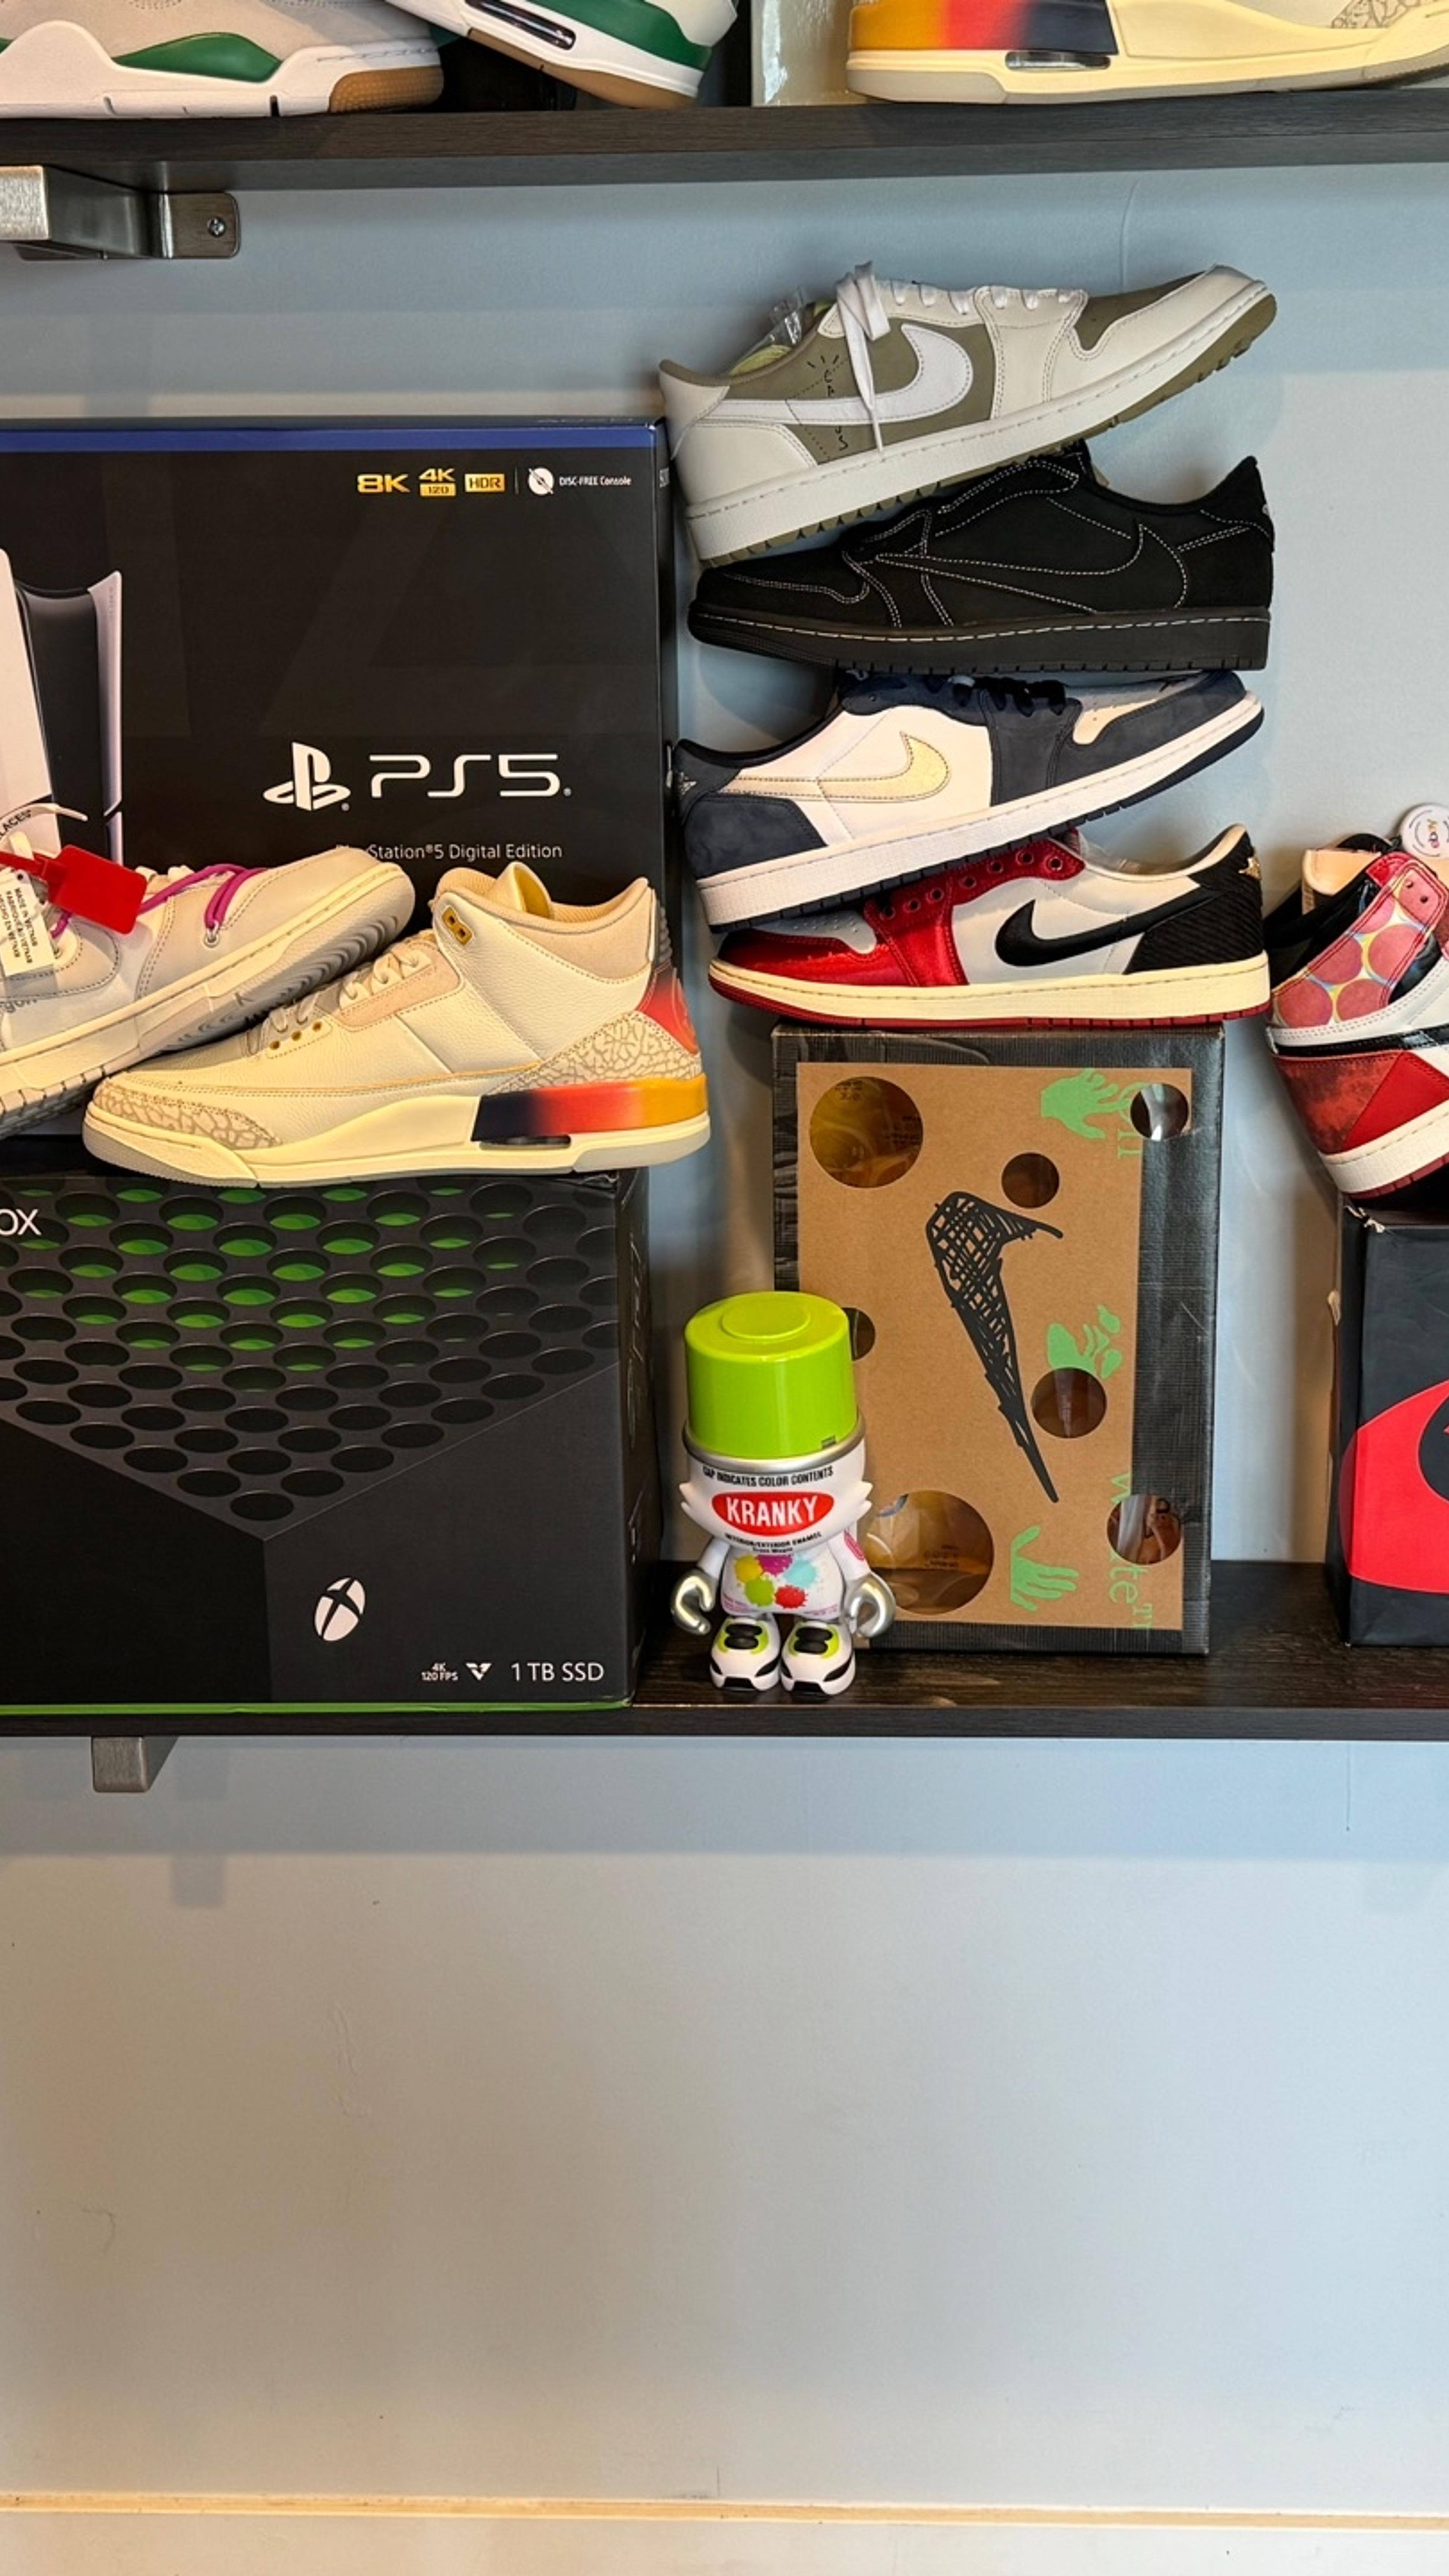 Preview image for the show titled "TRAVIS PHAMTONS OFFWHITE LOTS PS5 JORDANS" at April 17, 2024